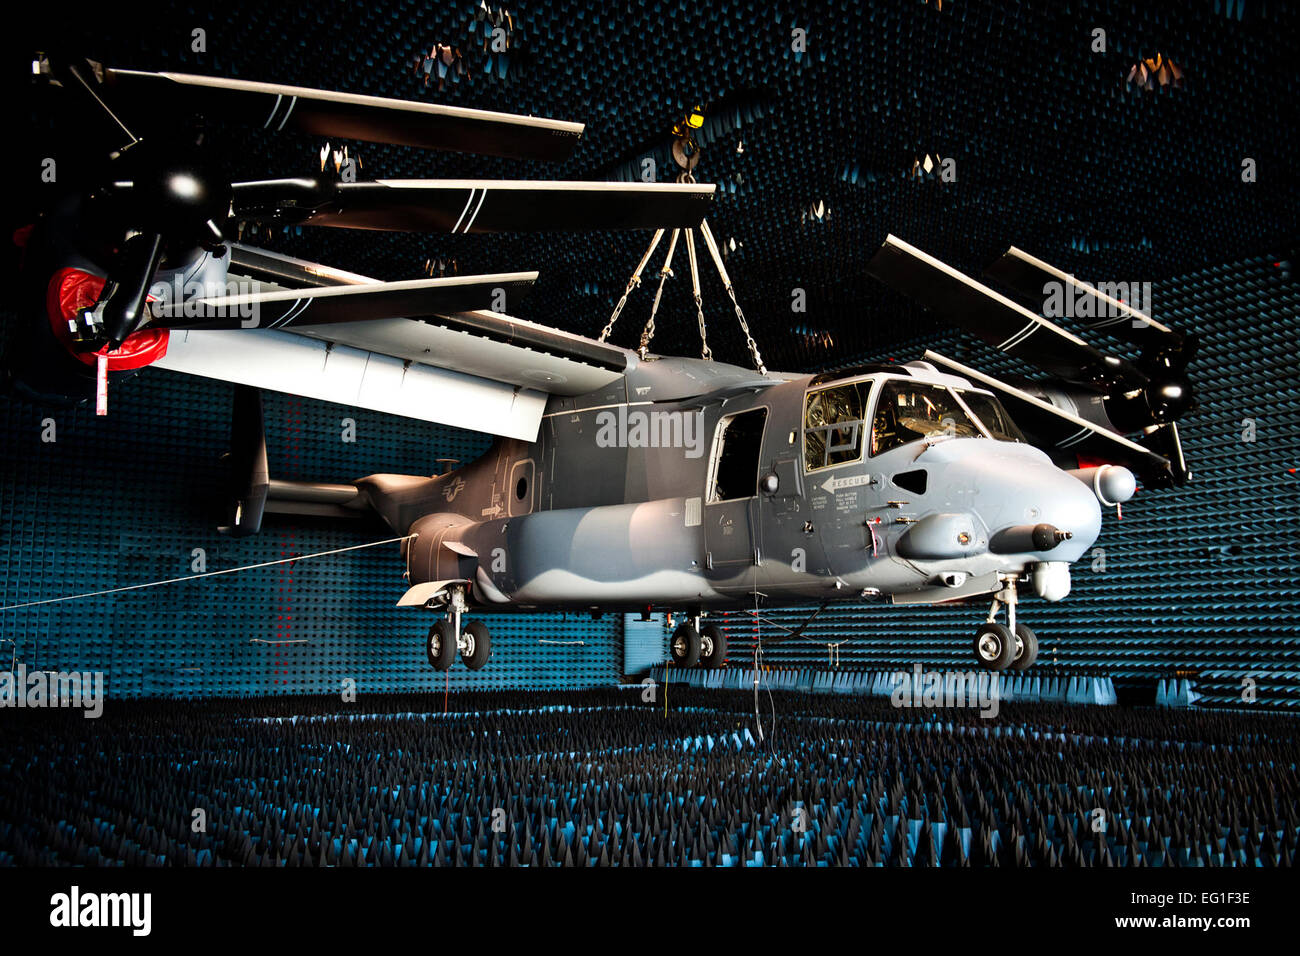 A U.S. Air Force CV-22 Osprey tiltrotor aircraft, belonging to the 8th Special Operations Squadron, hangs in the anechoic chamber at the joint preflight integration of munitions and electronic systems J-PRIMES hangar at Eglin Air Force Base, Fla., March 6, 2012. The J-PRIMES anechoic chamber is a room designed to stop internal reflections of electromagnetic waves as well as insulate from exterior sources of electromagnetic noise.  J-PRIMES provides this environment to facilitate testing air-to-air and air-to-surface munitions and electronics systems on full-scale aircraft and land vehicles pri Stock Photo